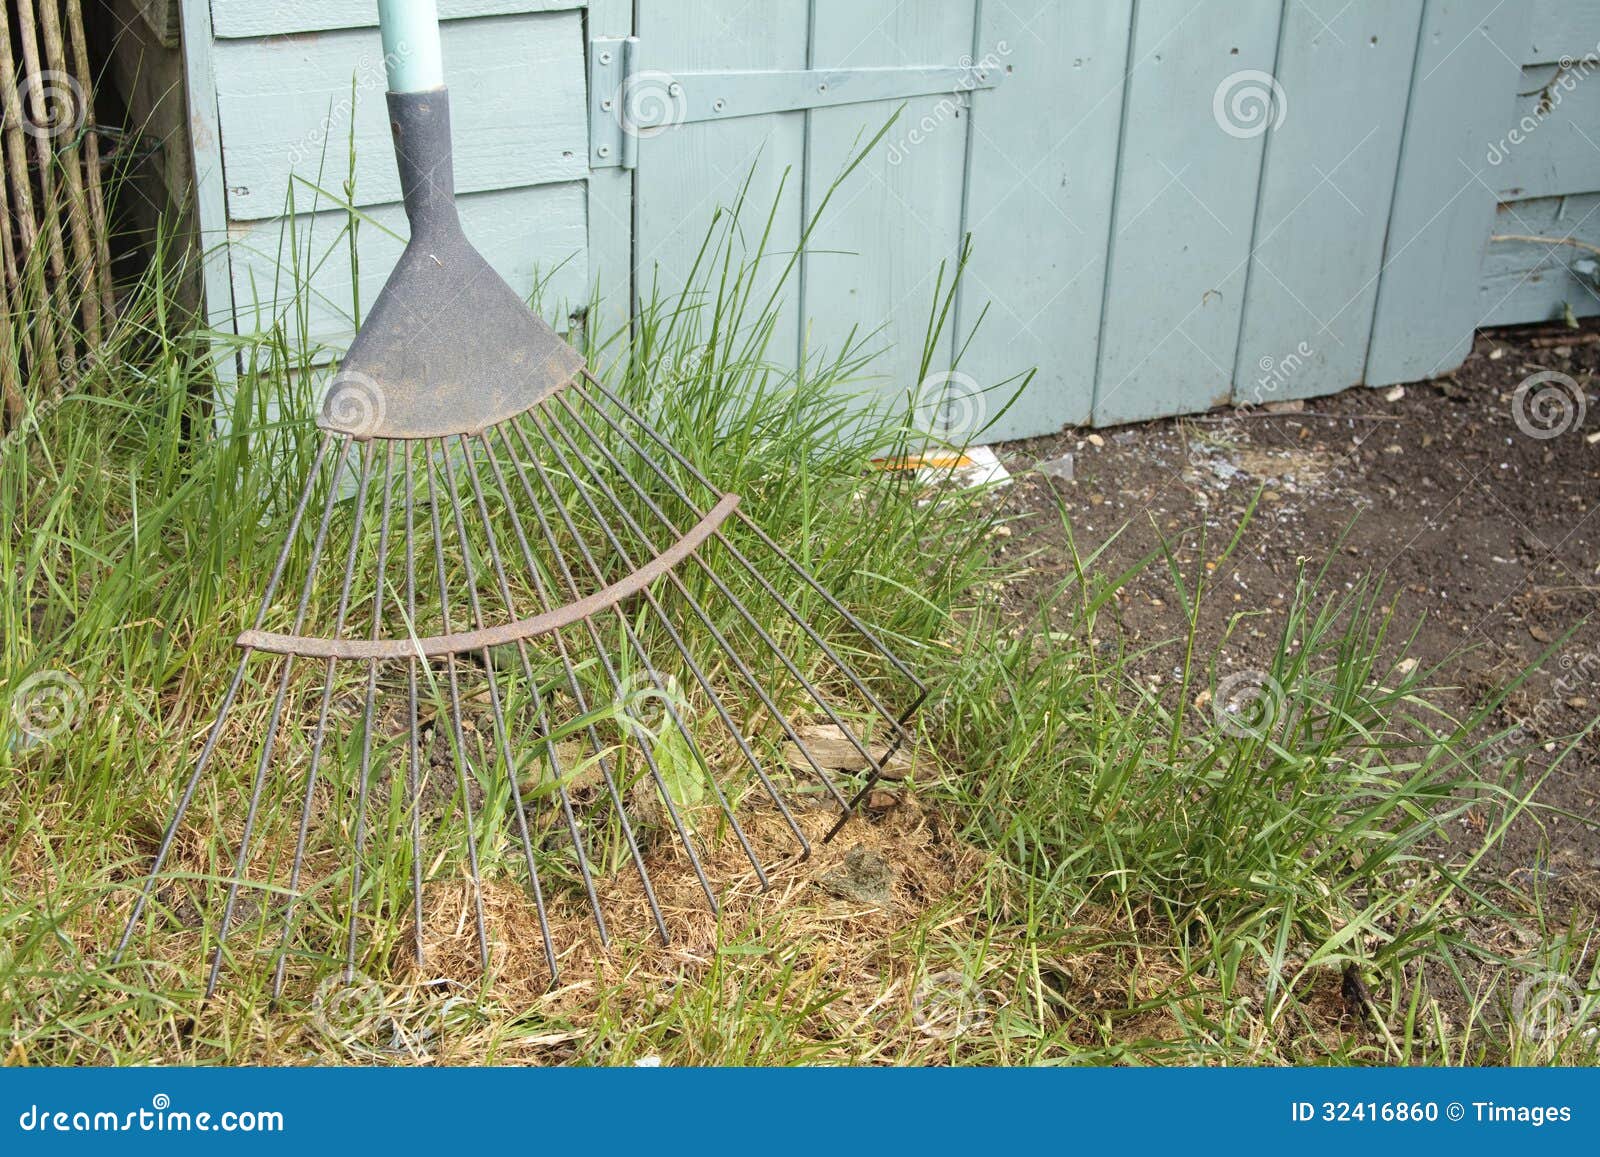 garden rake resting against a shed in overgrown grass.